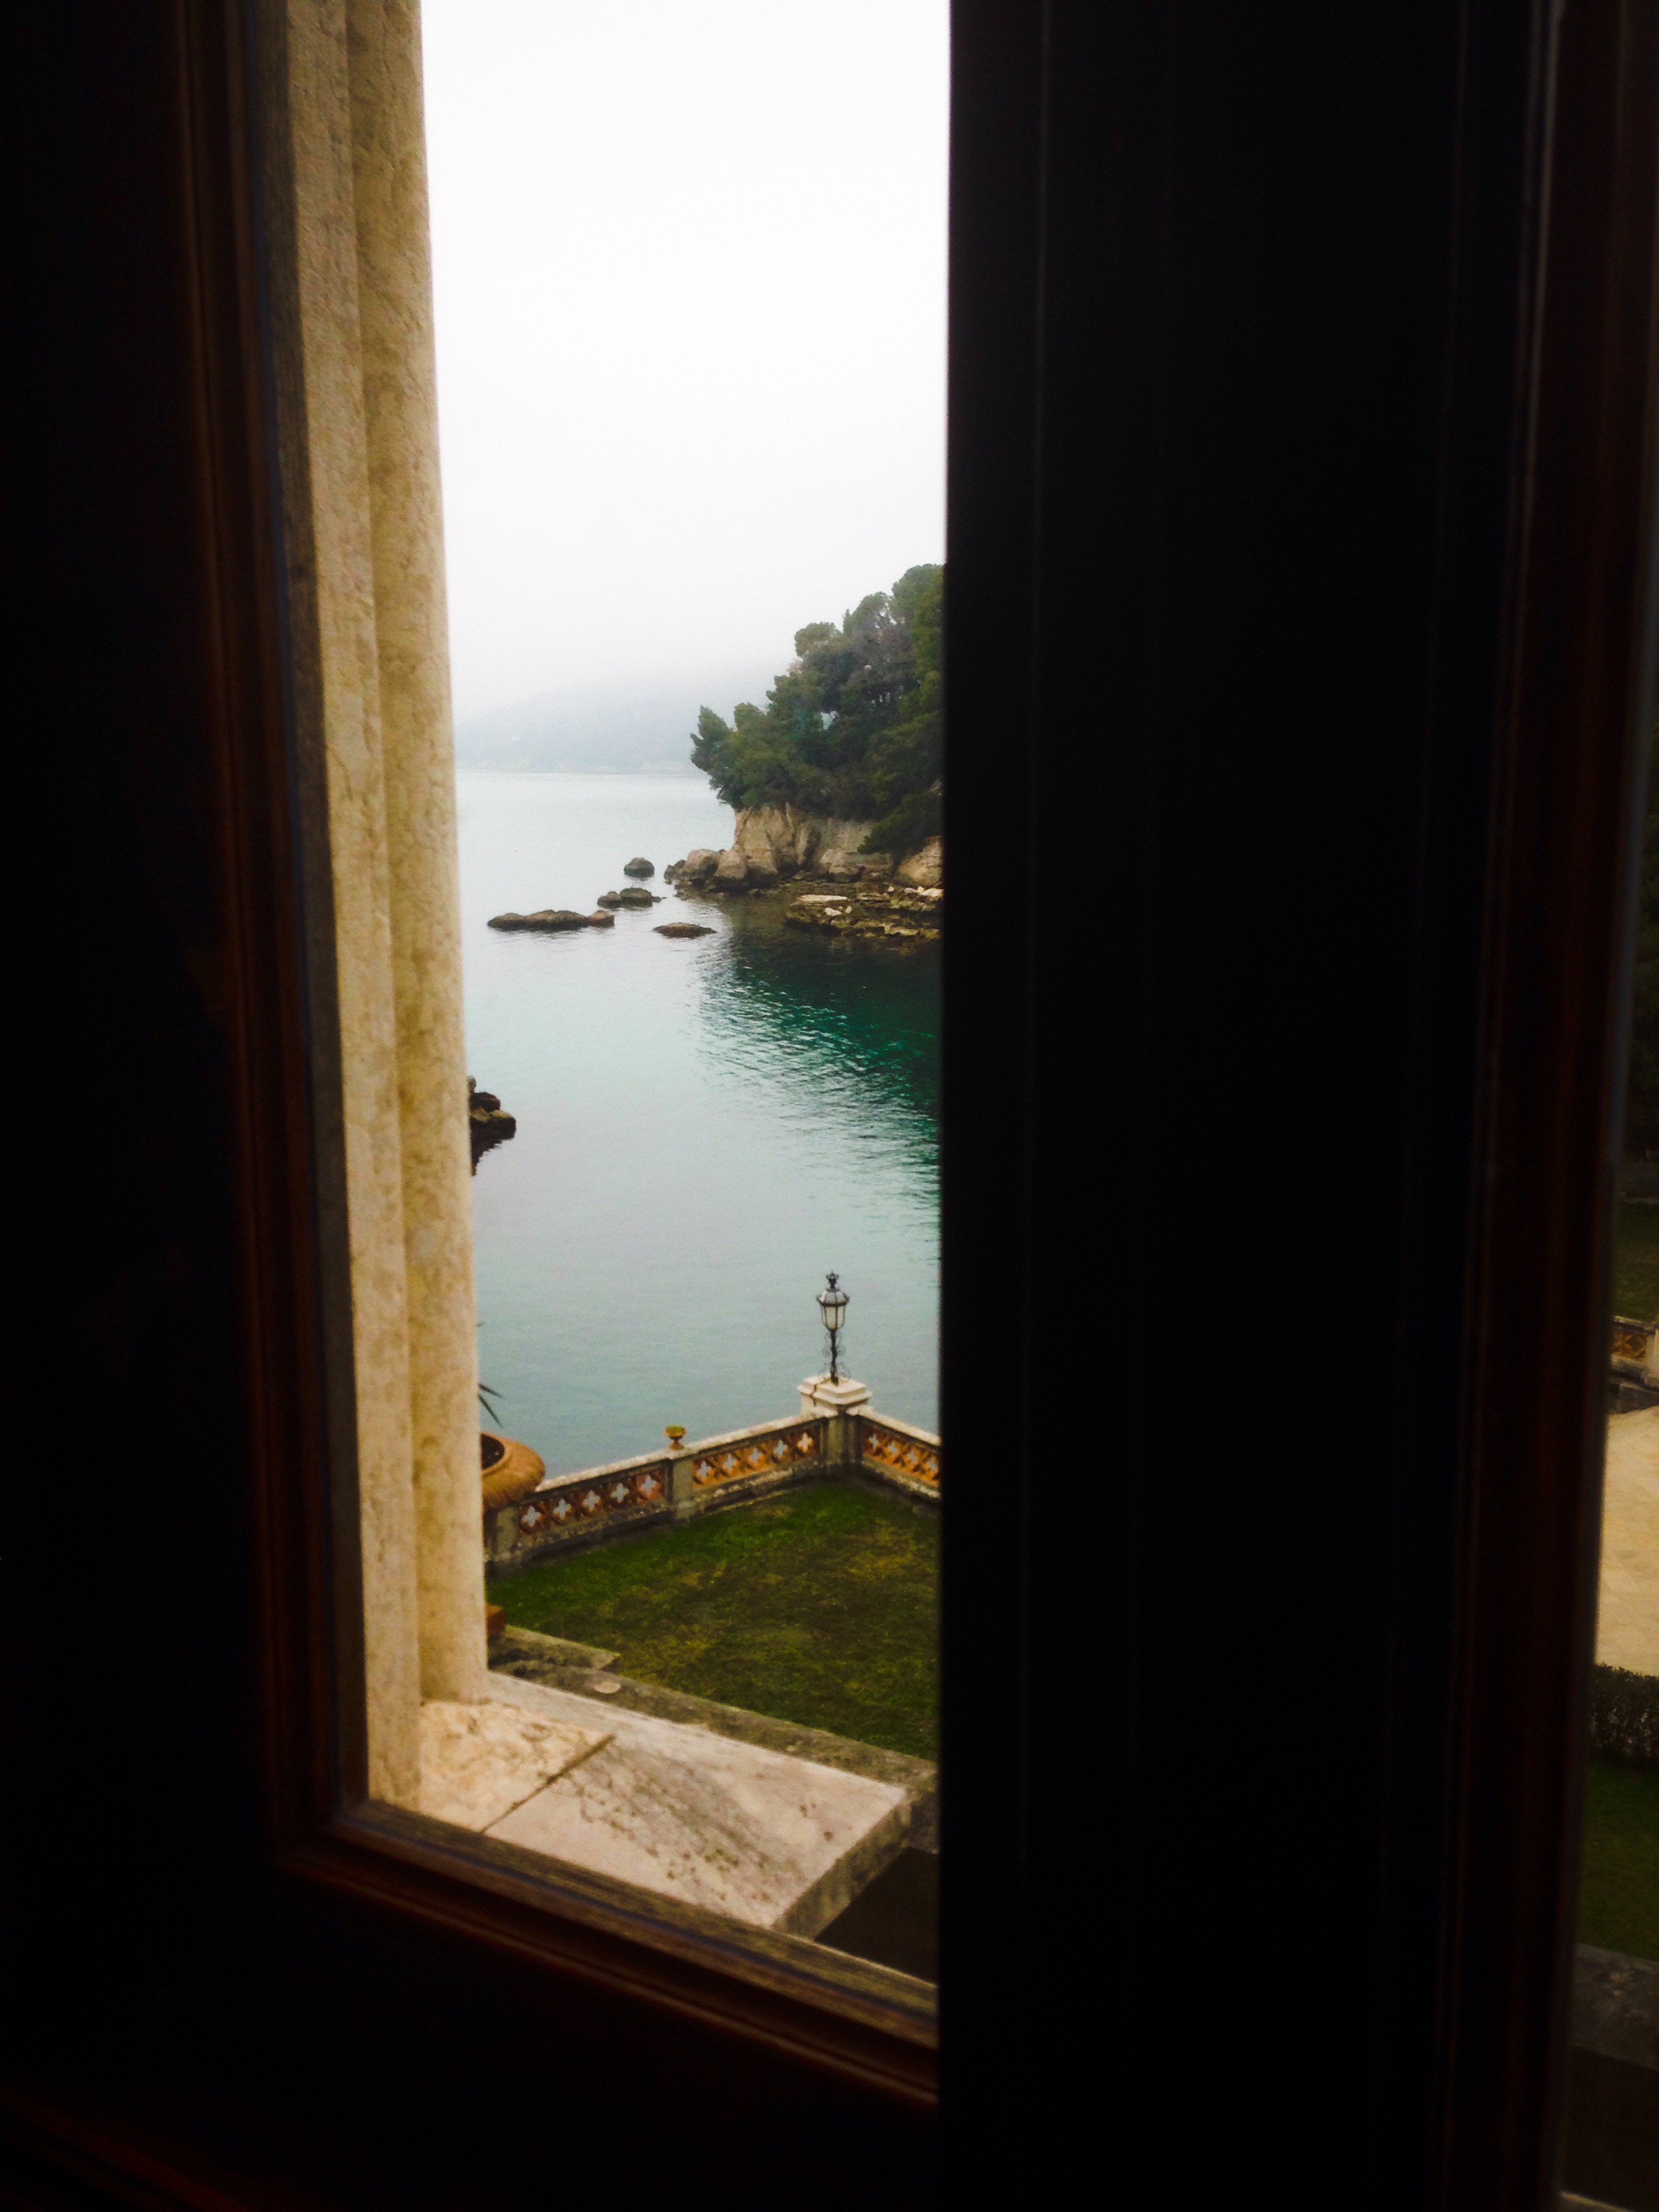 Miramare has its own boat landing, viewed here from one of the castle windows.